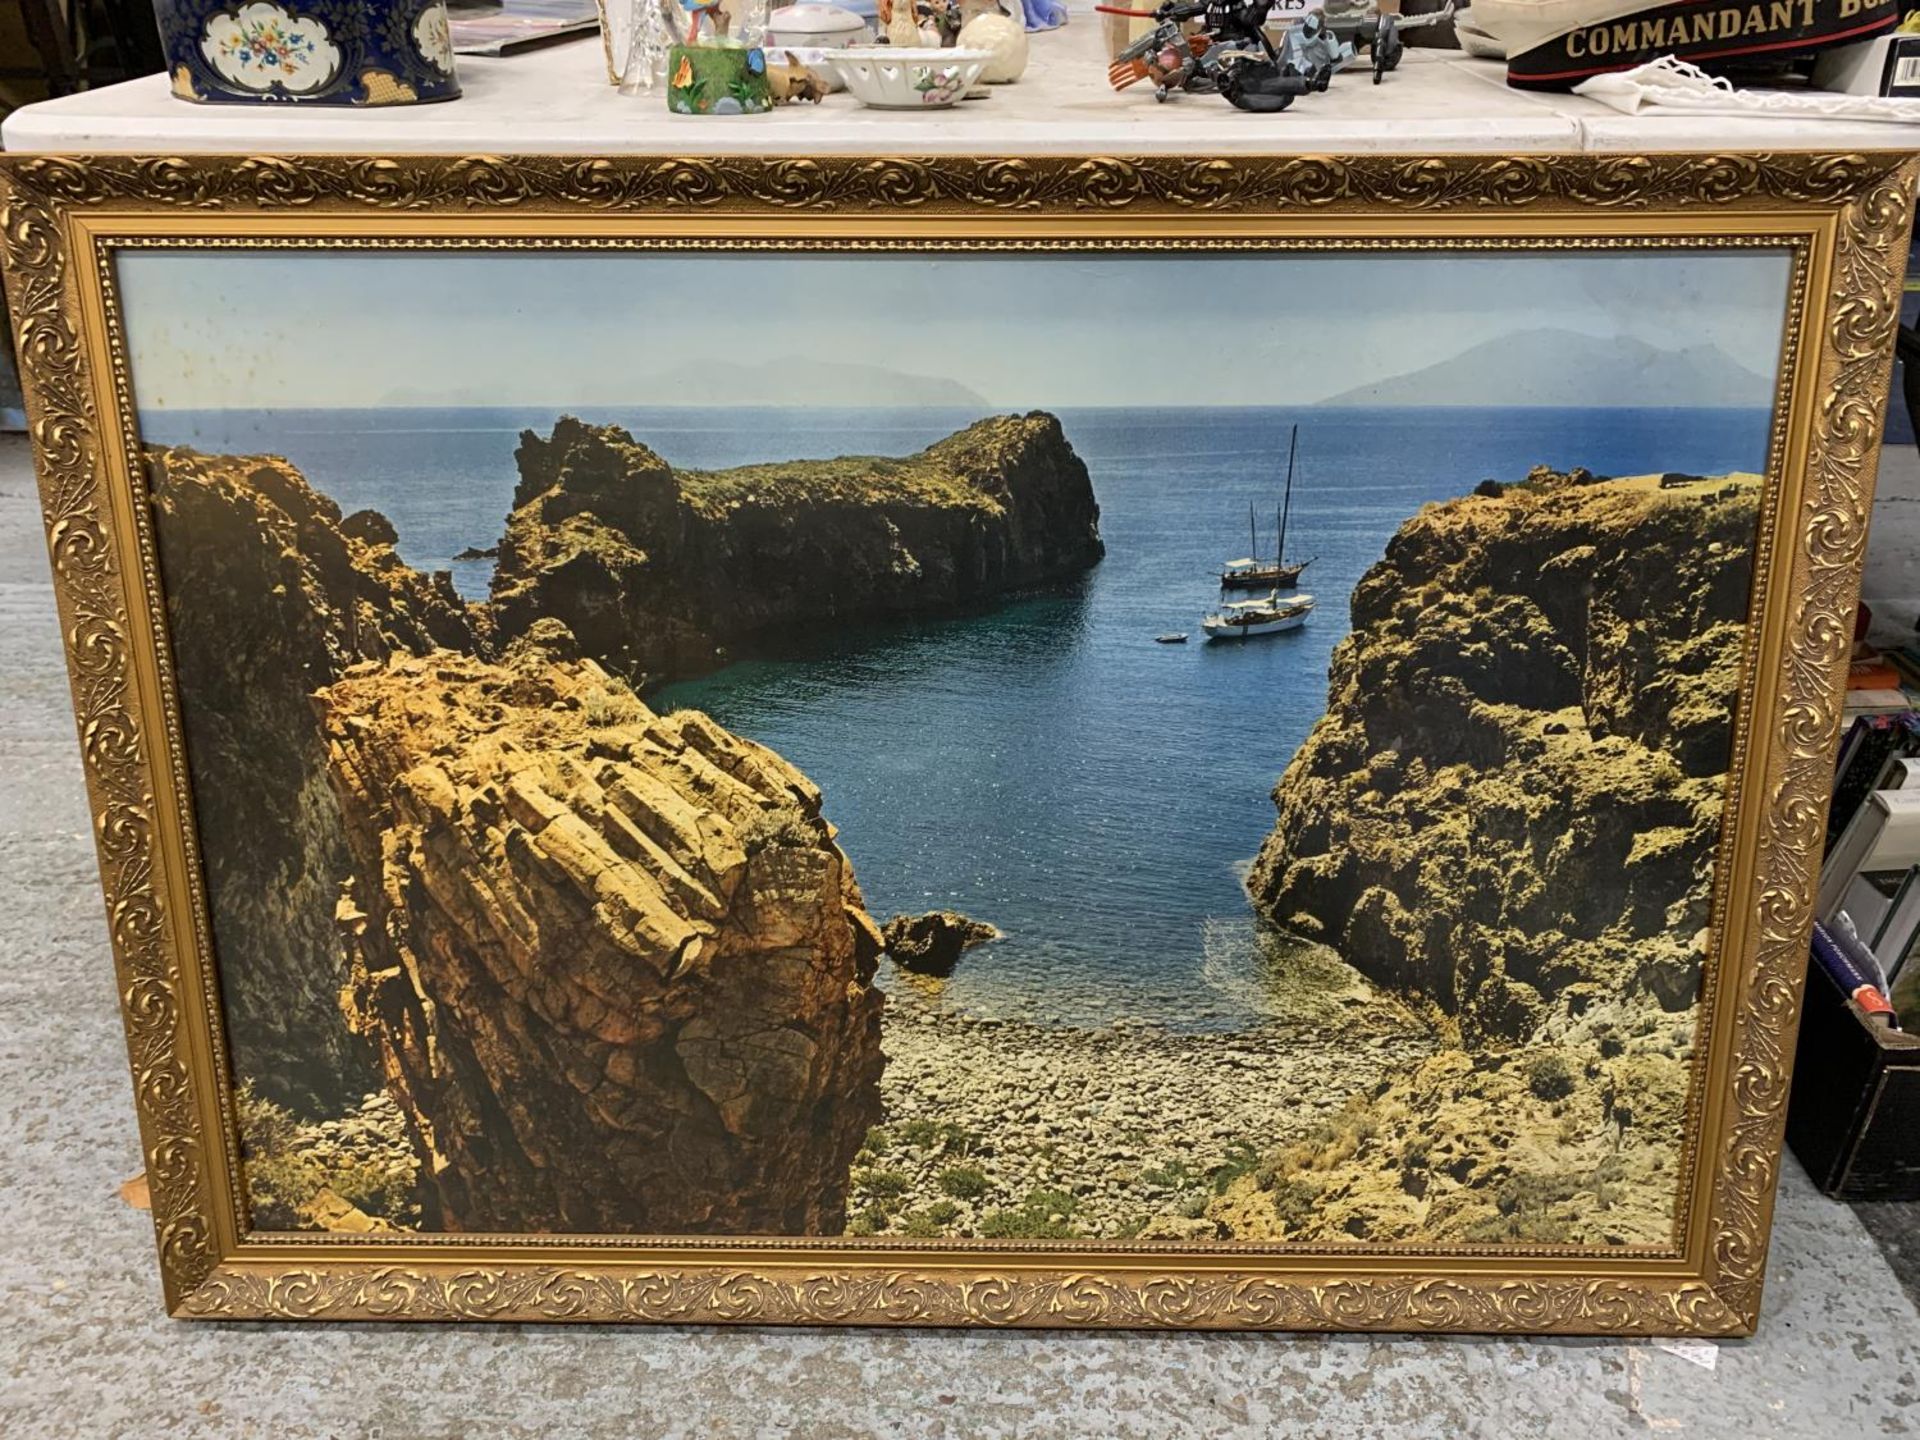 A LARGE FRAMED PRINT OF BOATS NEAR A BEACH - Image 2 of 2